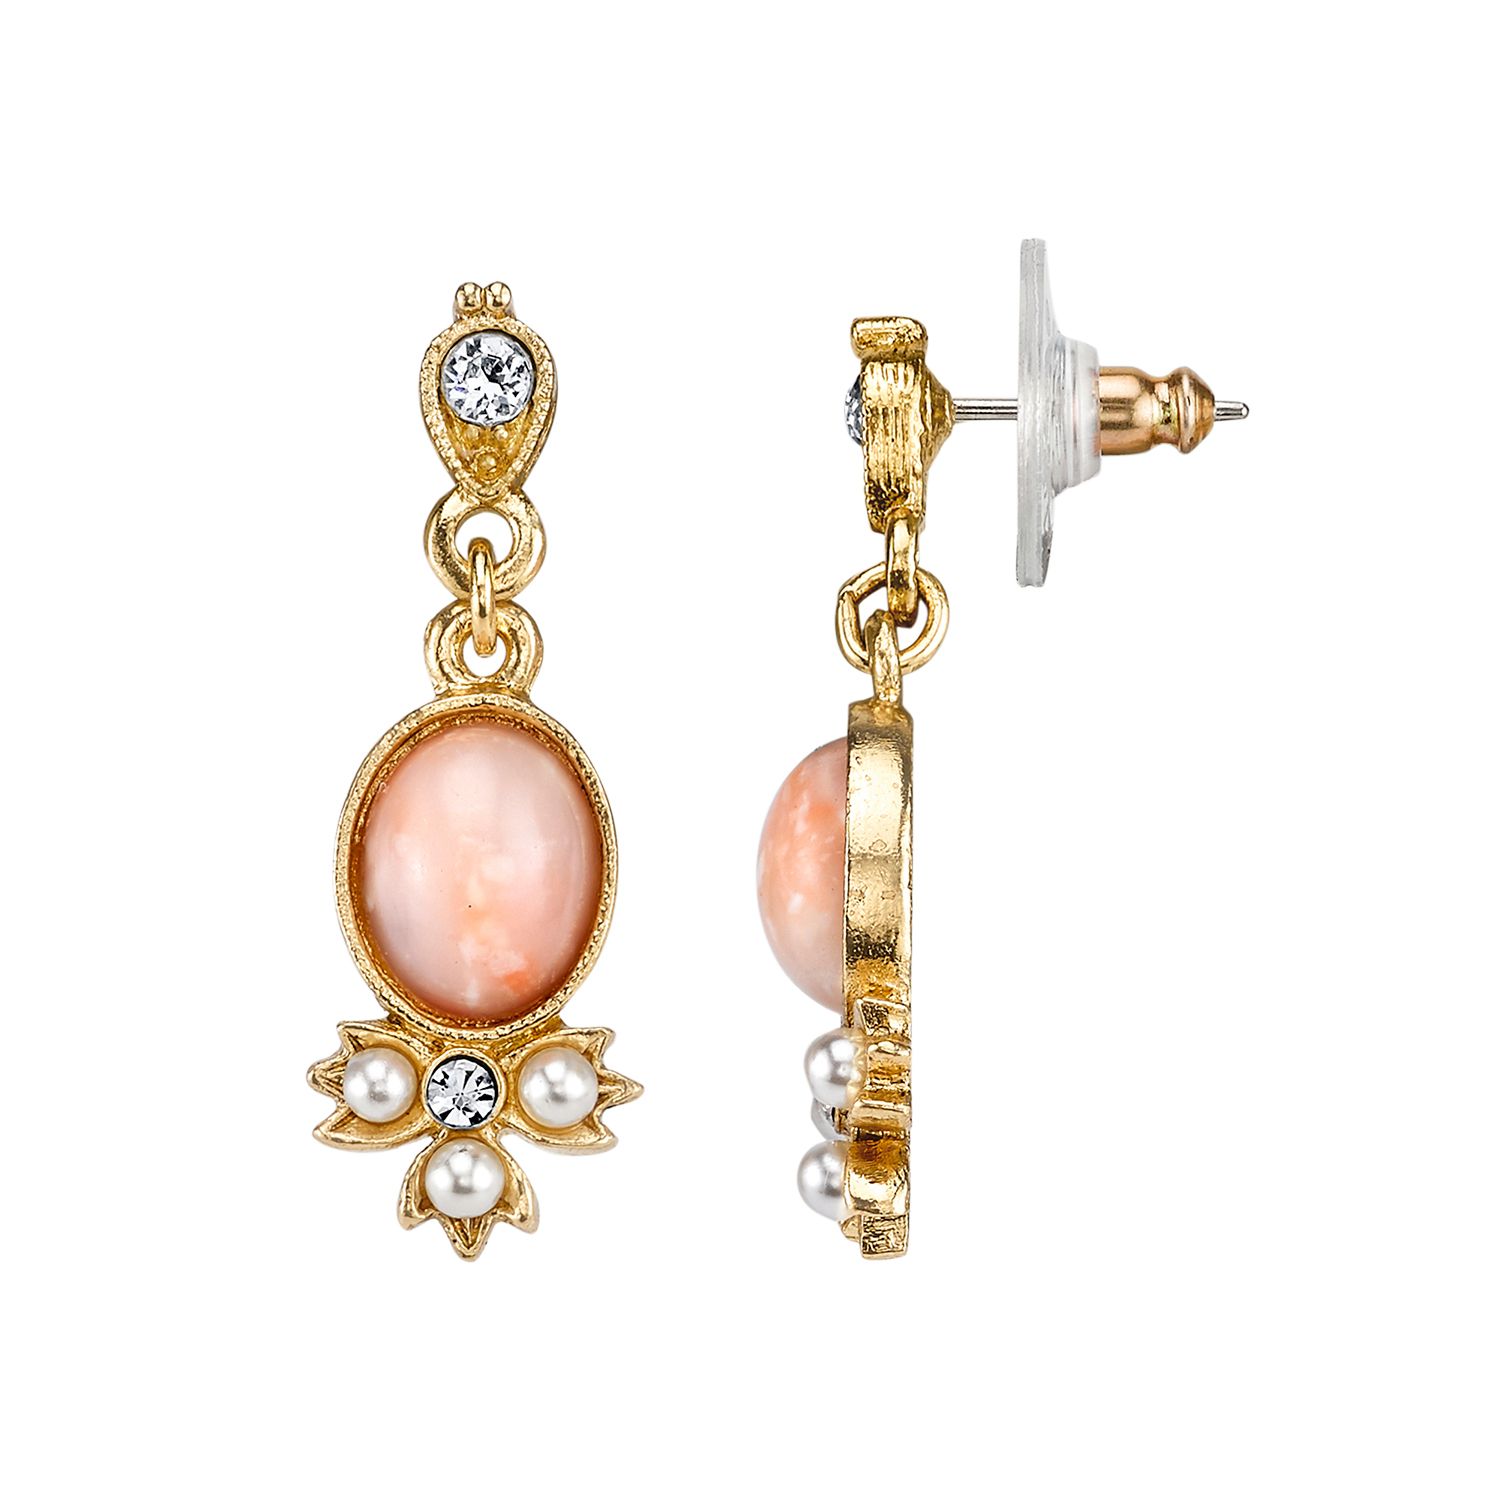 Image for Downton Abbey Cabochon Drop Earrings at Kohl's.